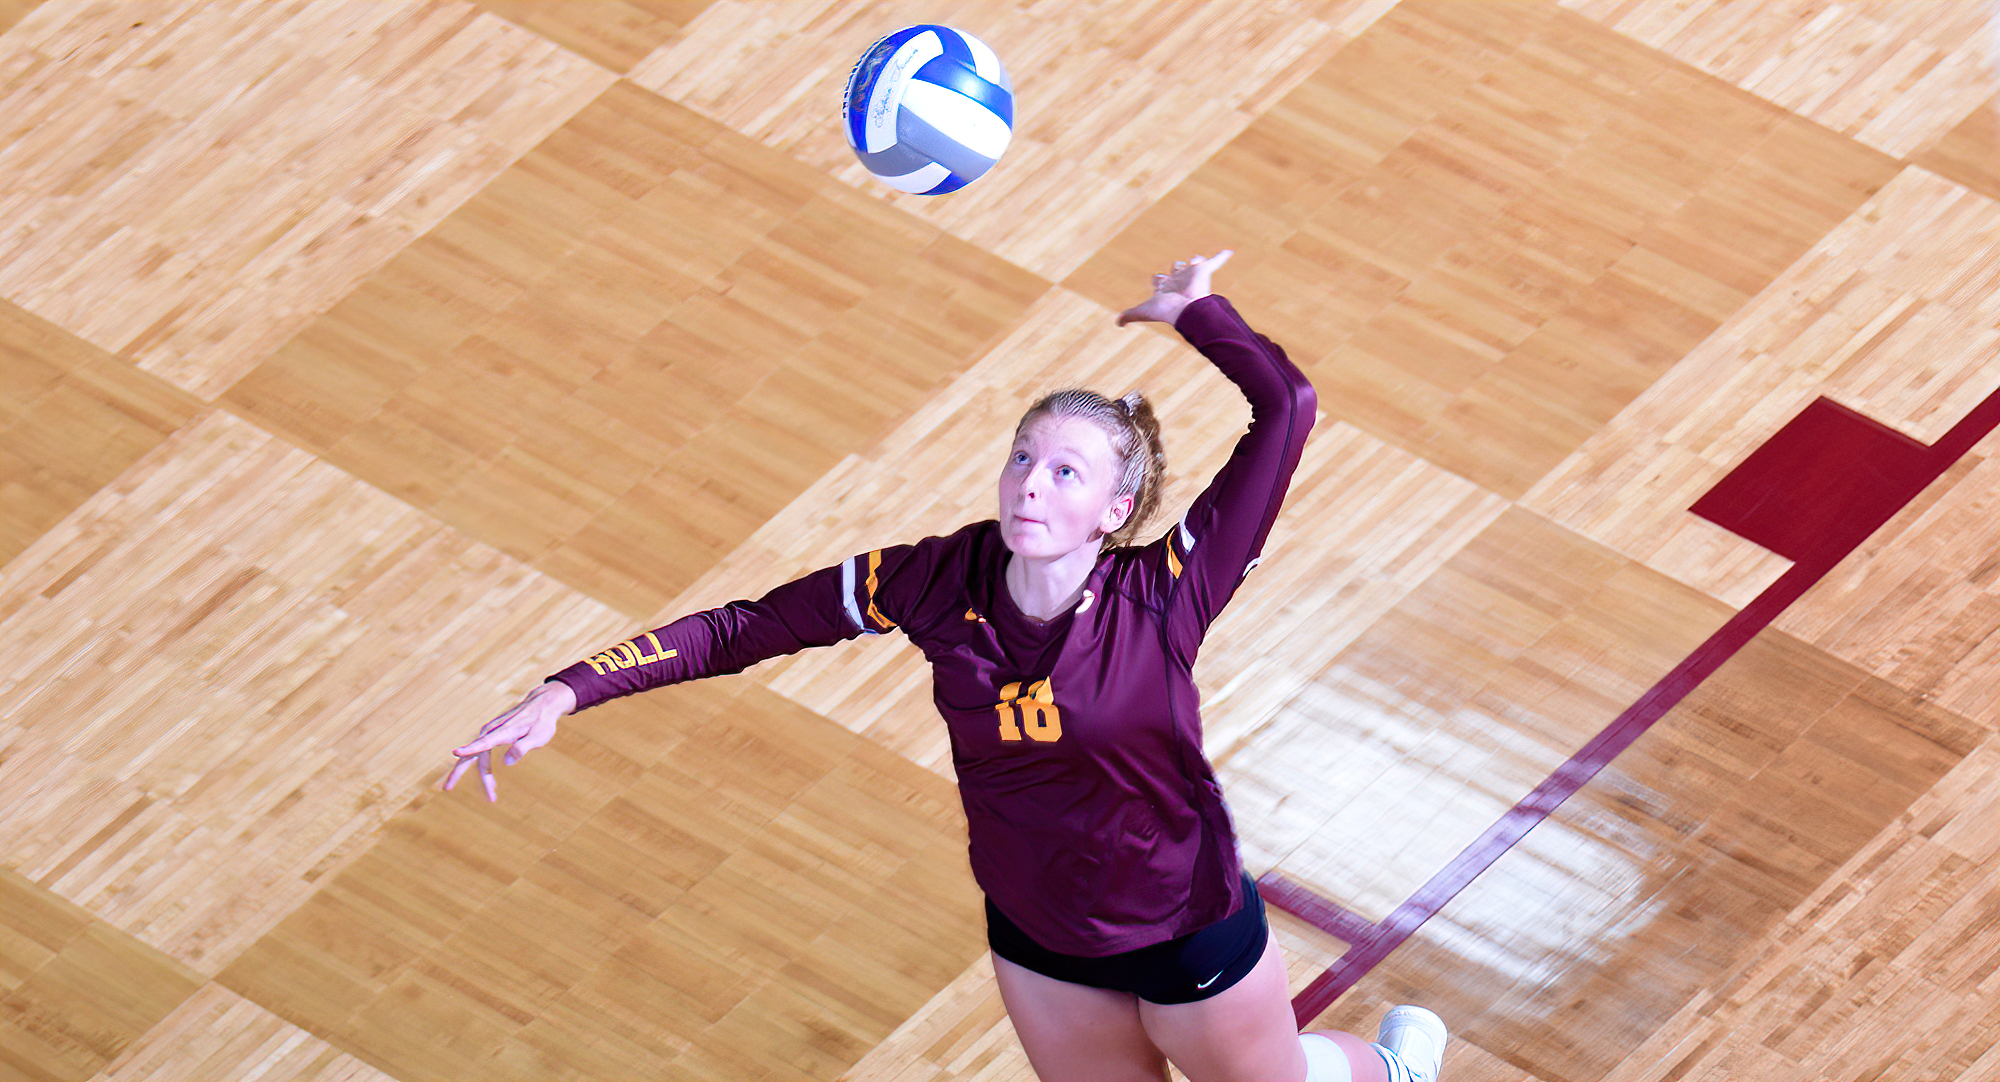 Freshman Hannah Keil had 11 kills in the Cobbers match at Macalester. It was her sixth double-digit kill total of the season.